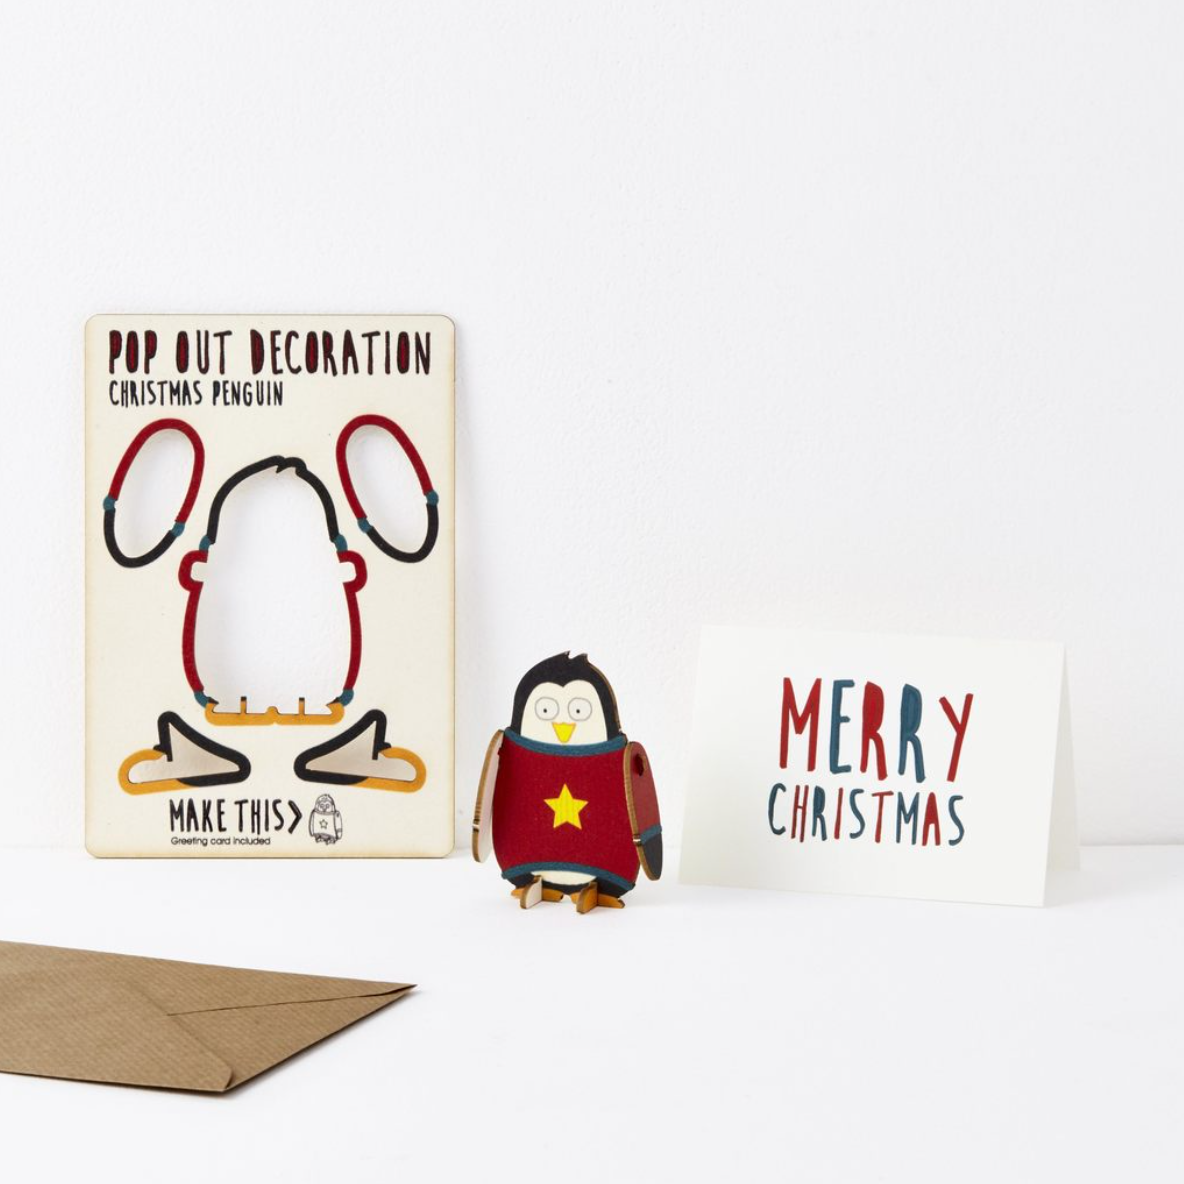 Christmas Penguin Pop Out Decoration and Card